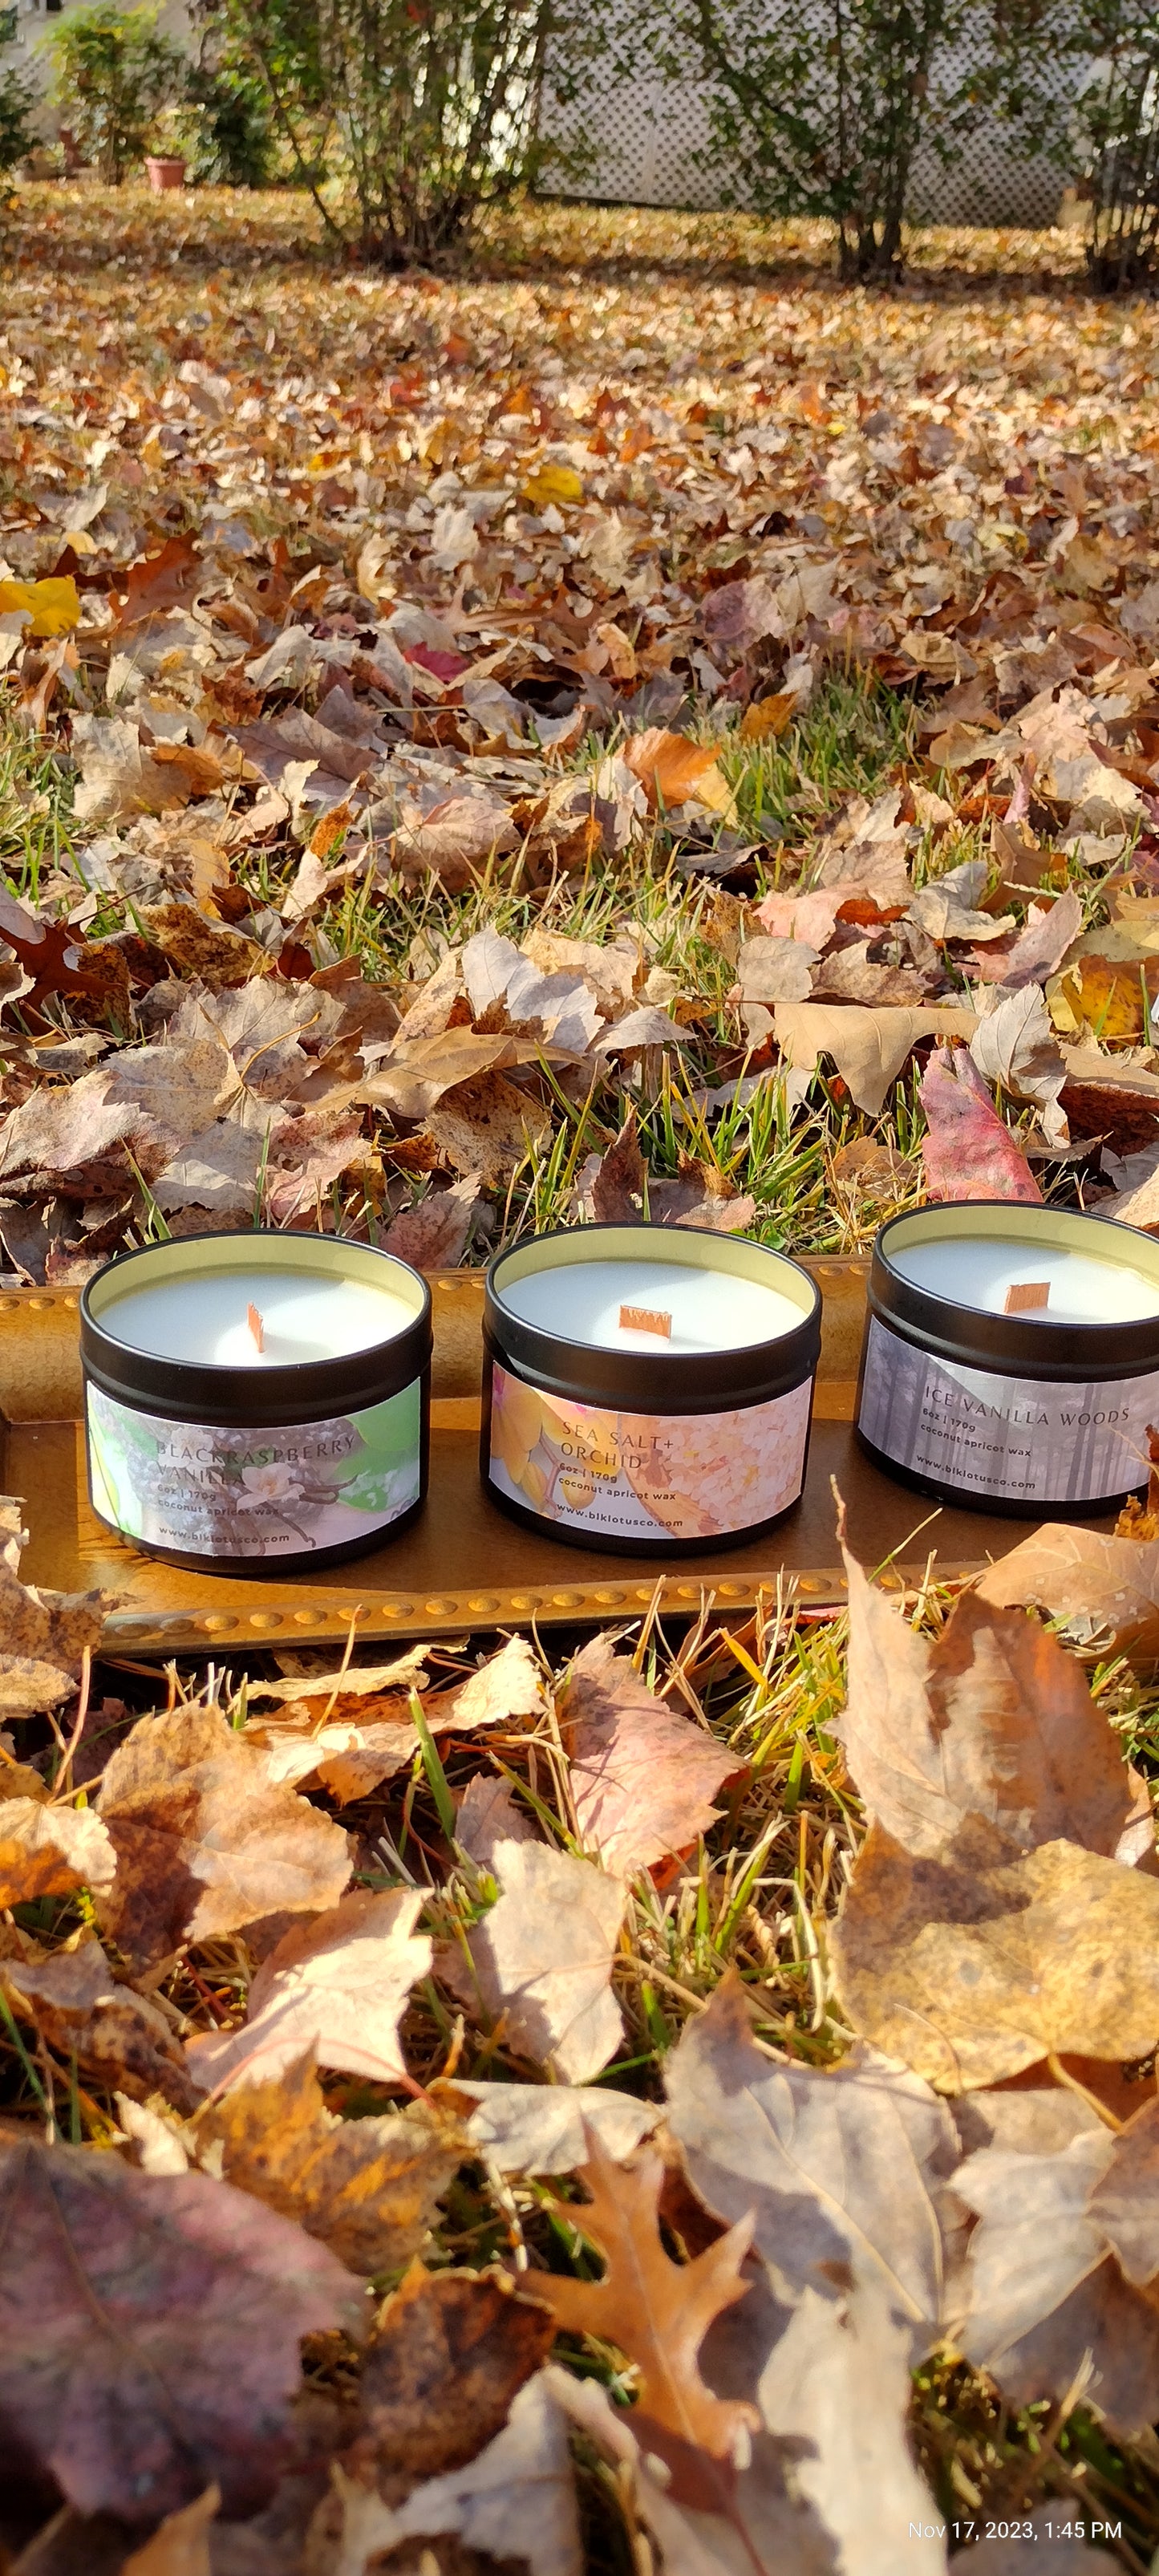 Embrace Cozy Vibes: 6 oz Black Tin Sweater Weather Coco Apricot Wax Candle with Wooden Wick